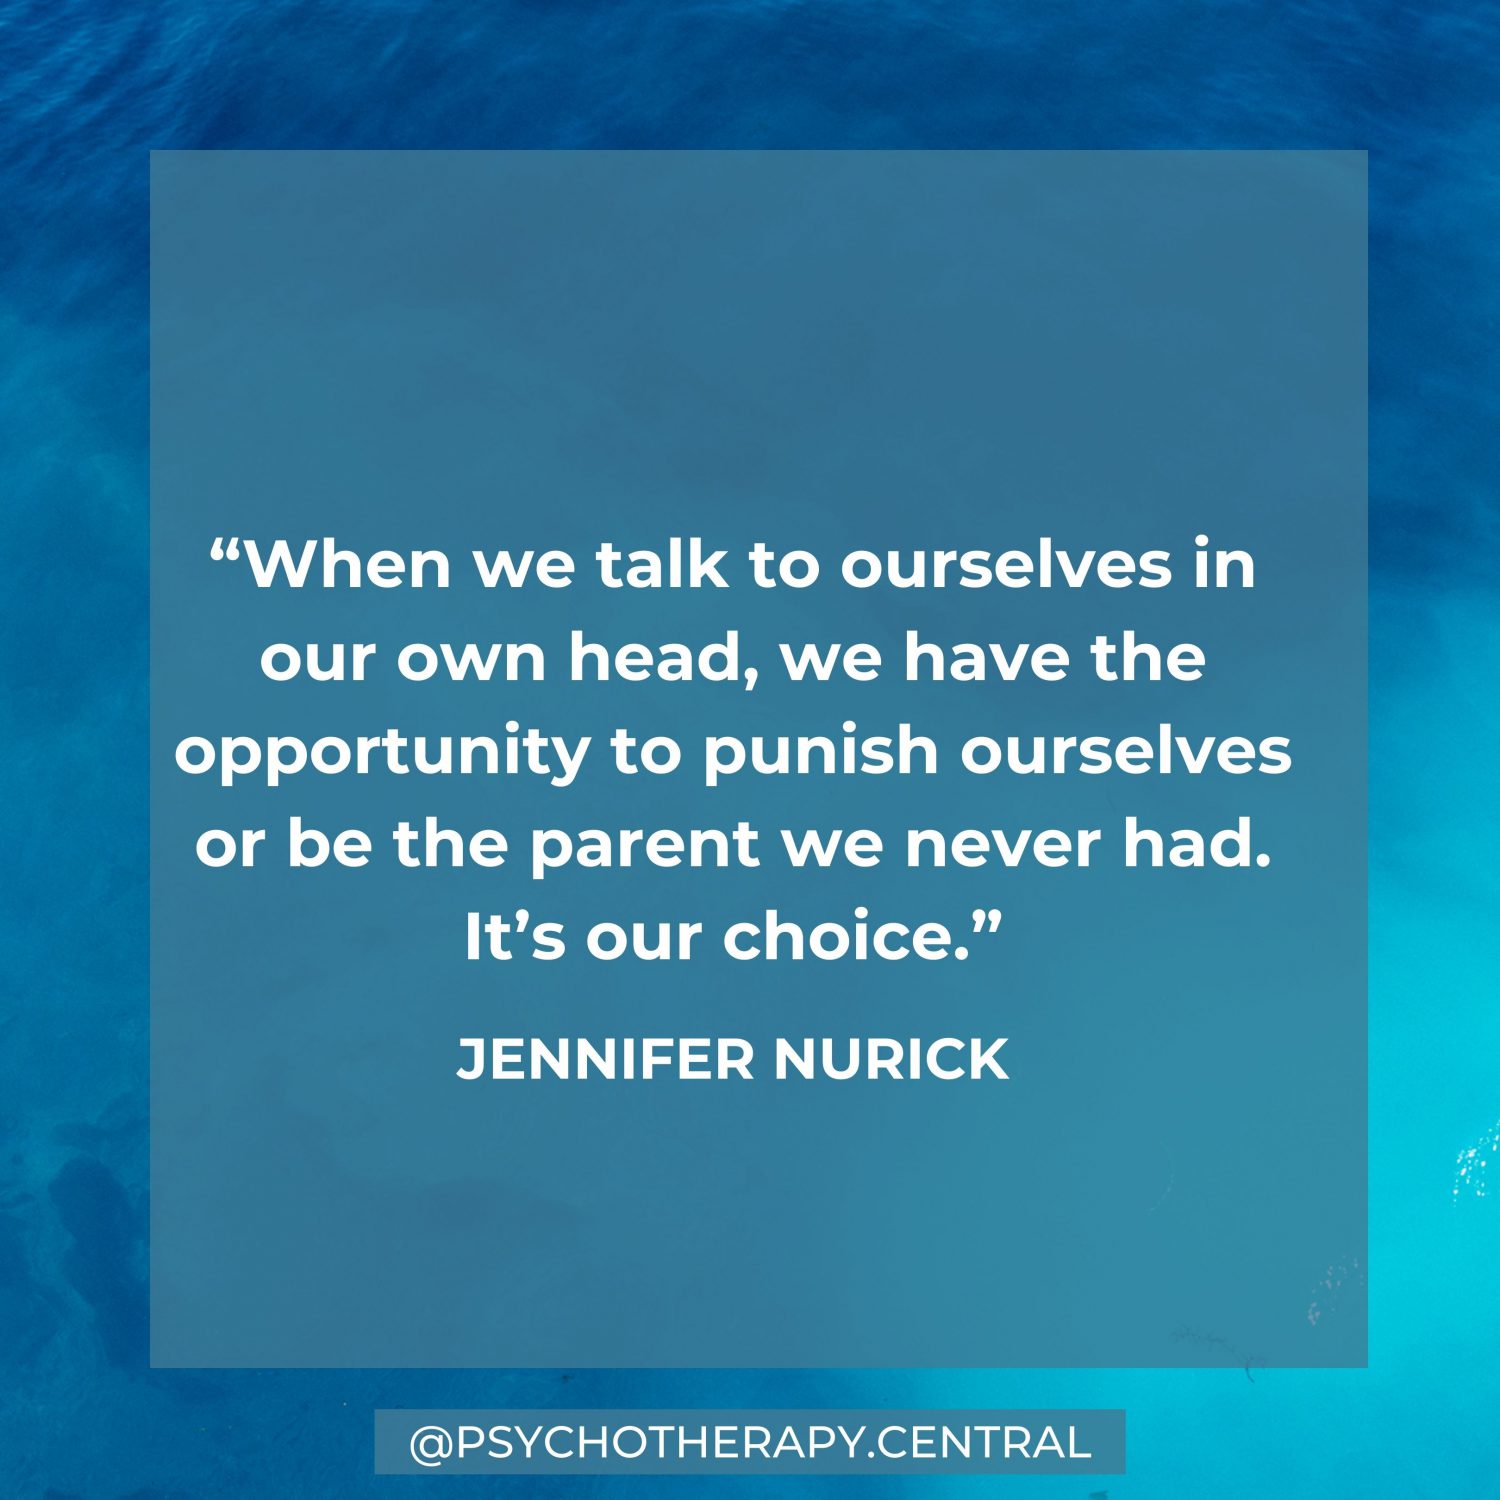 “When we talk to ourselves in our head, we have the opportunity to punish ourselves or be the parent we never had. It’s our choice.” – JENNIFER NURICK